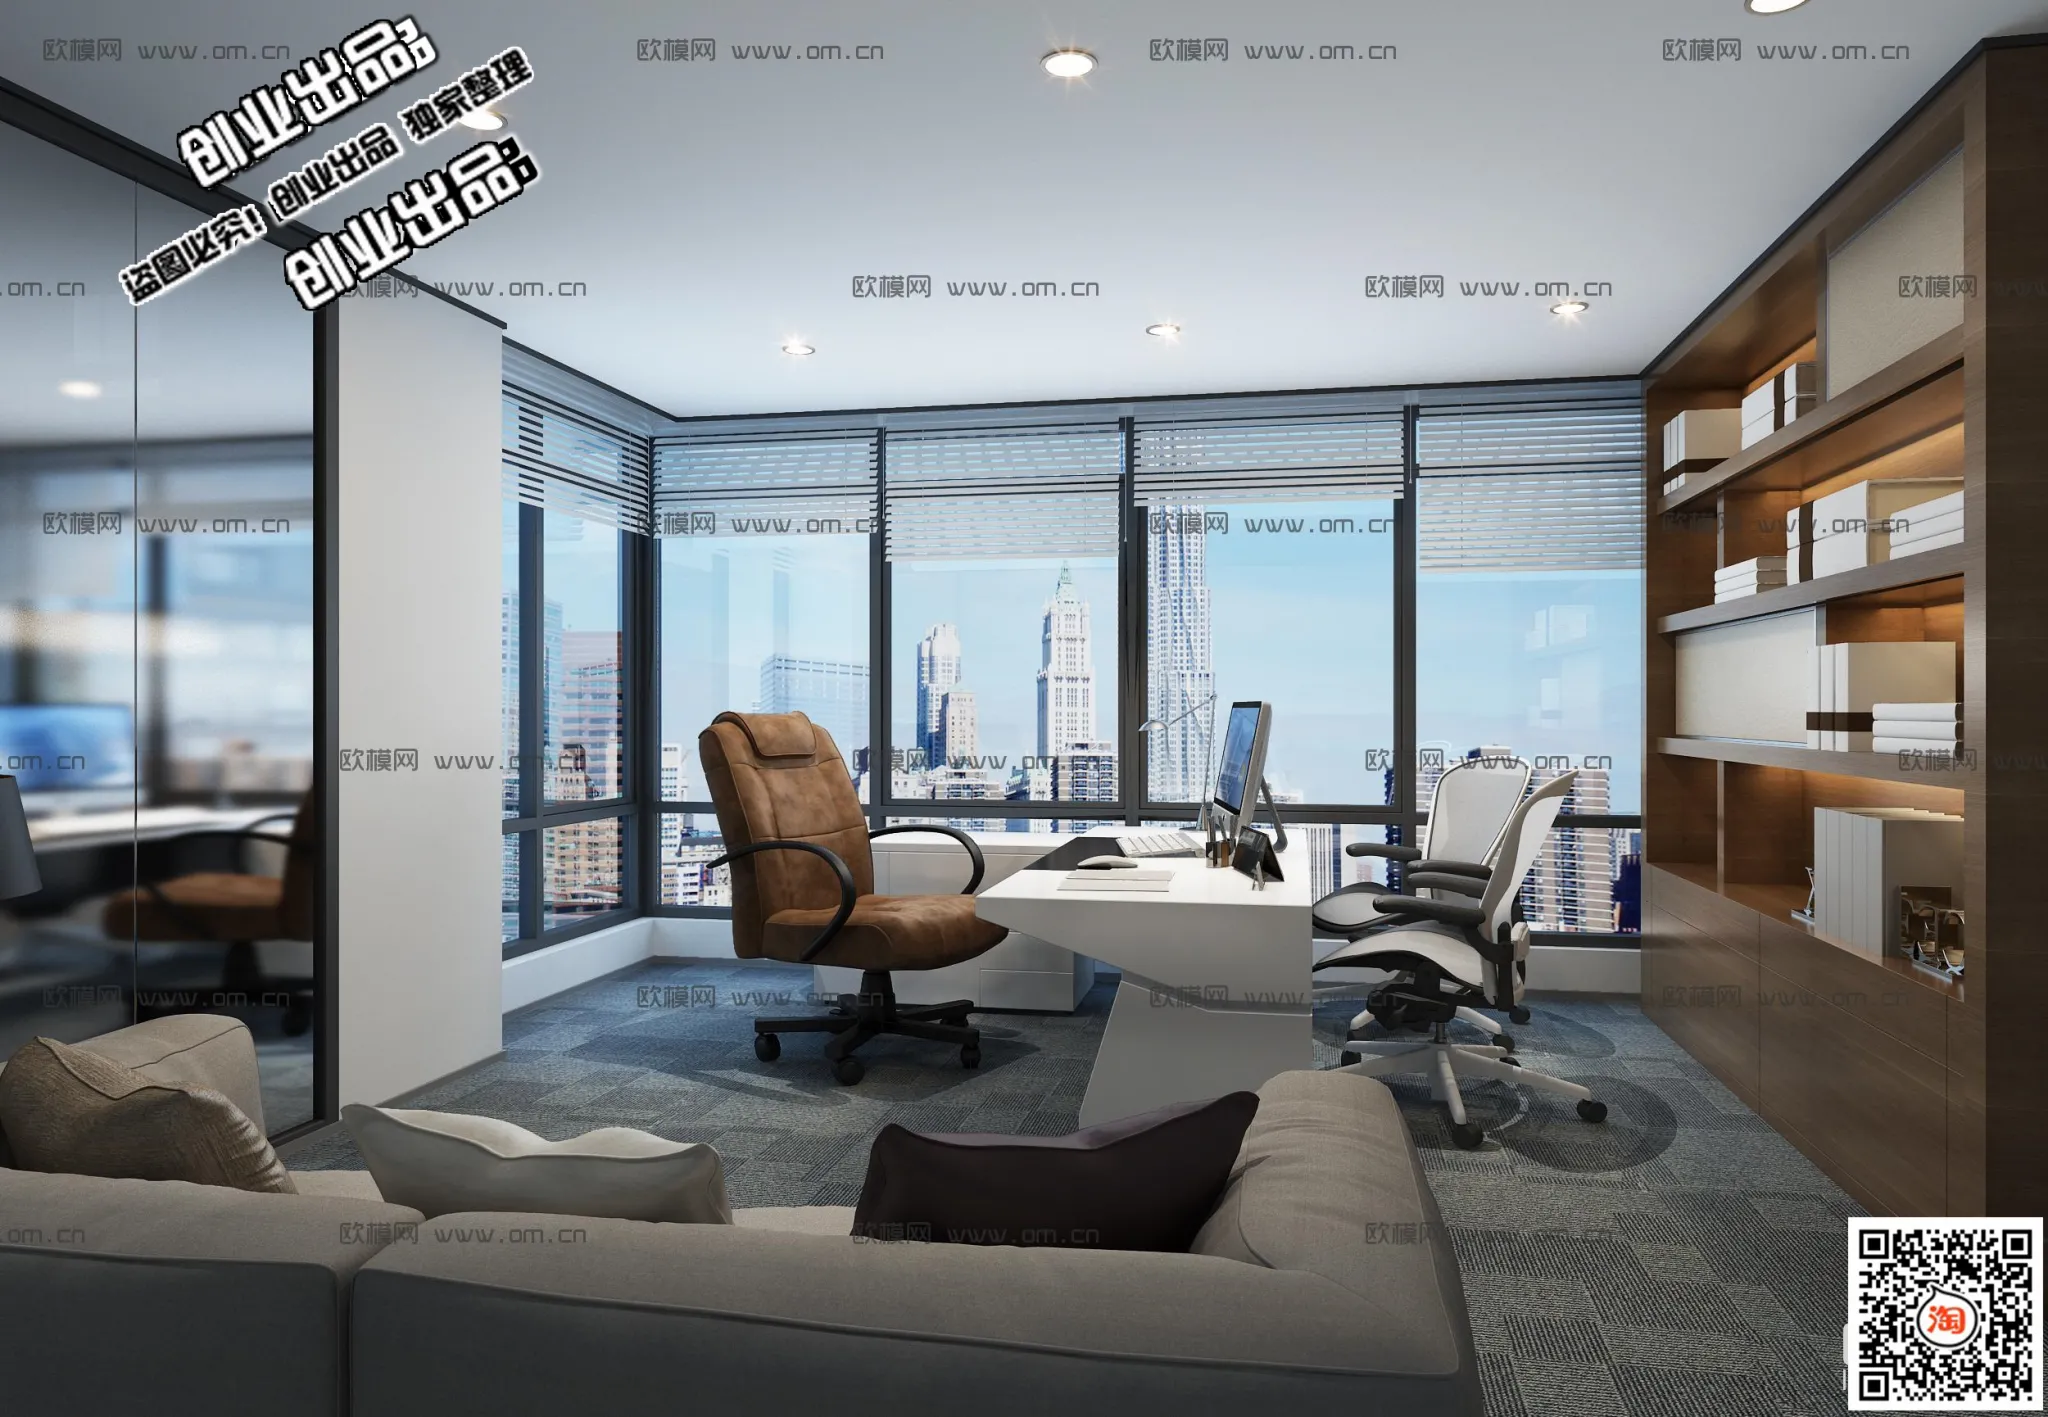 3D OFFICE INTERIOR (VRAY) – MANAGER ROOM 3D SCENES – 056